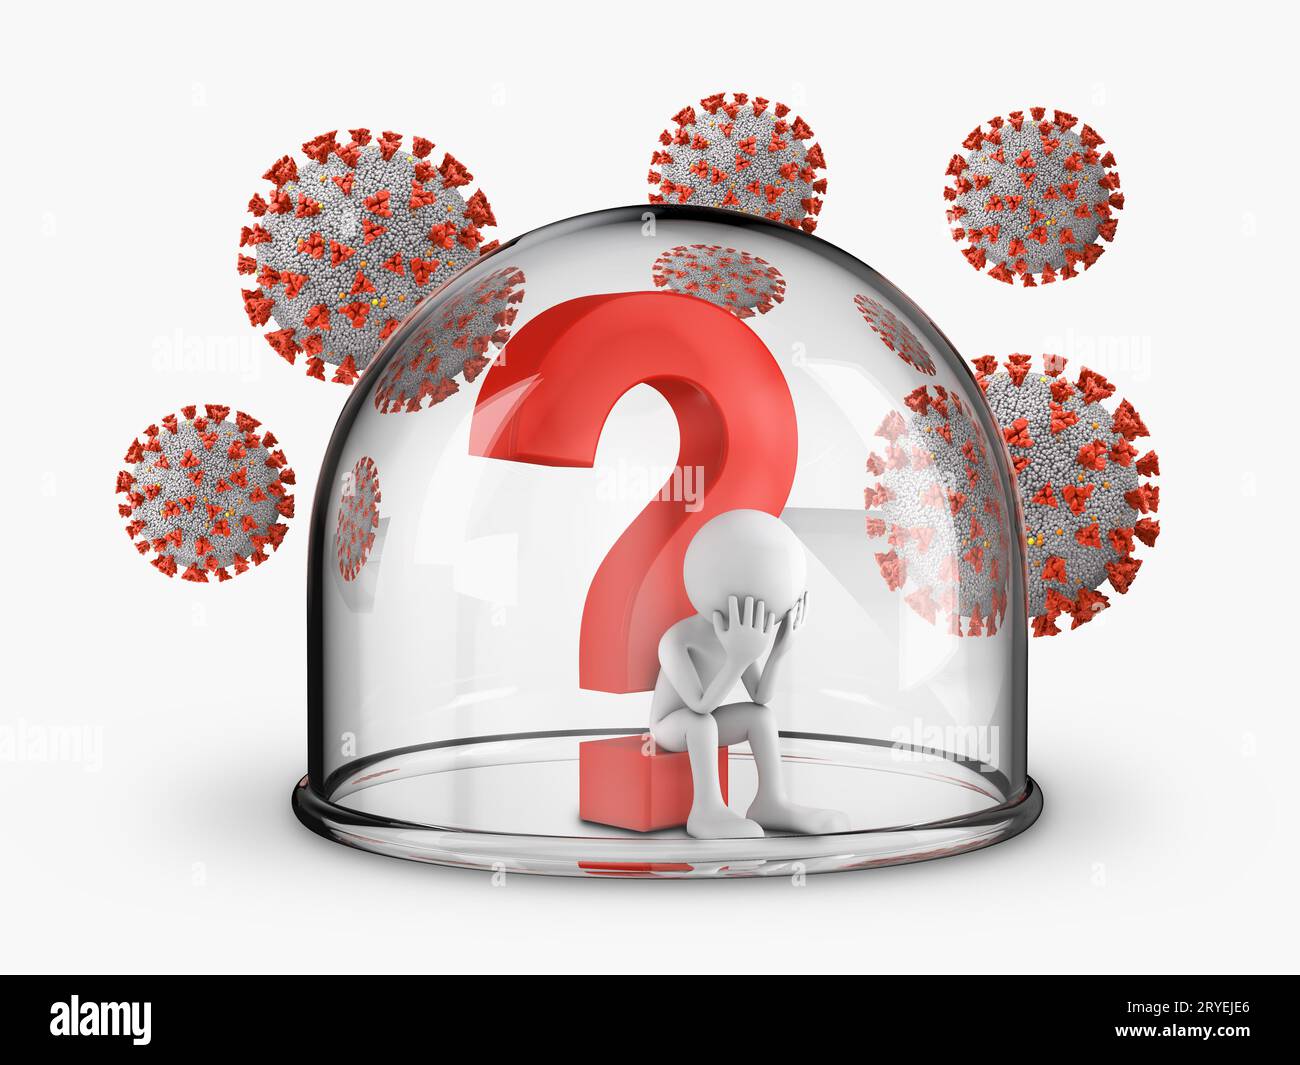 Man under the question mark inside the dome and coronaviruses Stock Photo